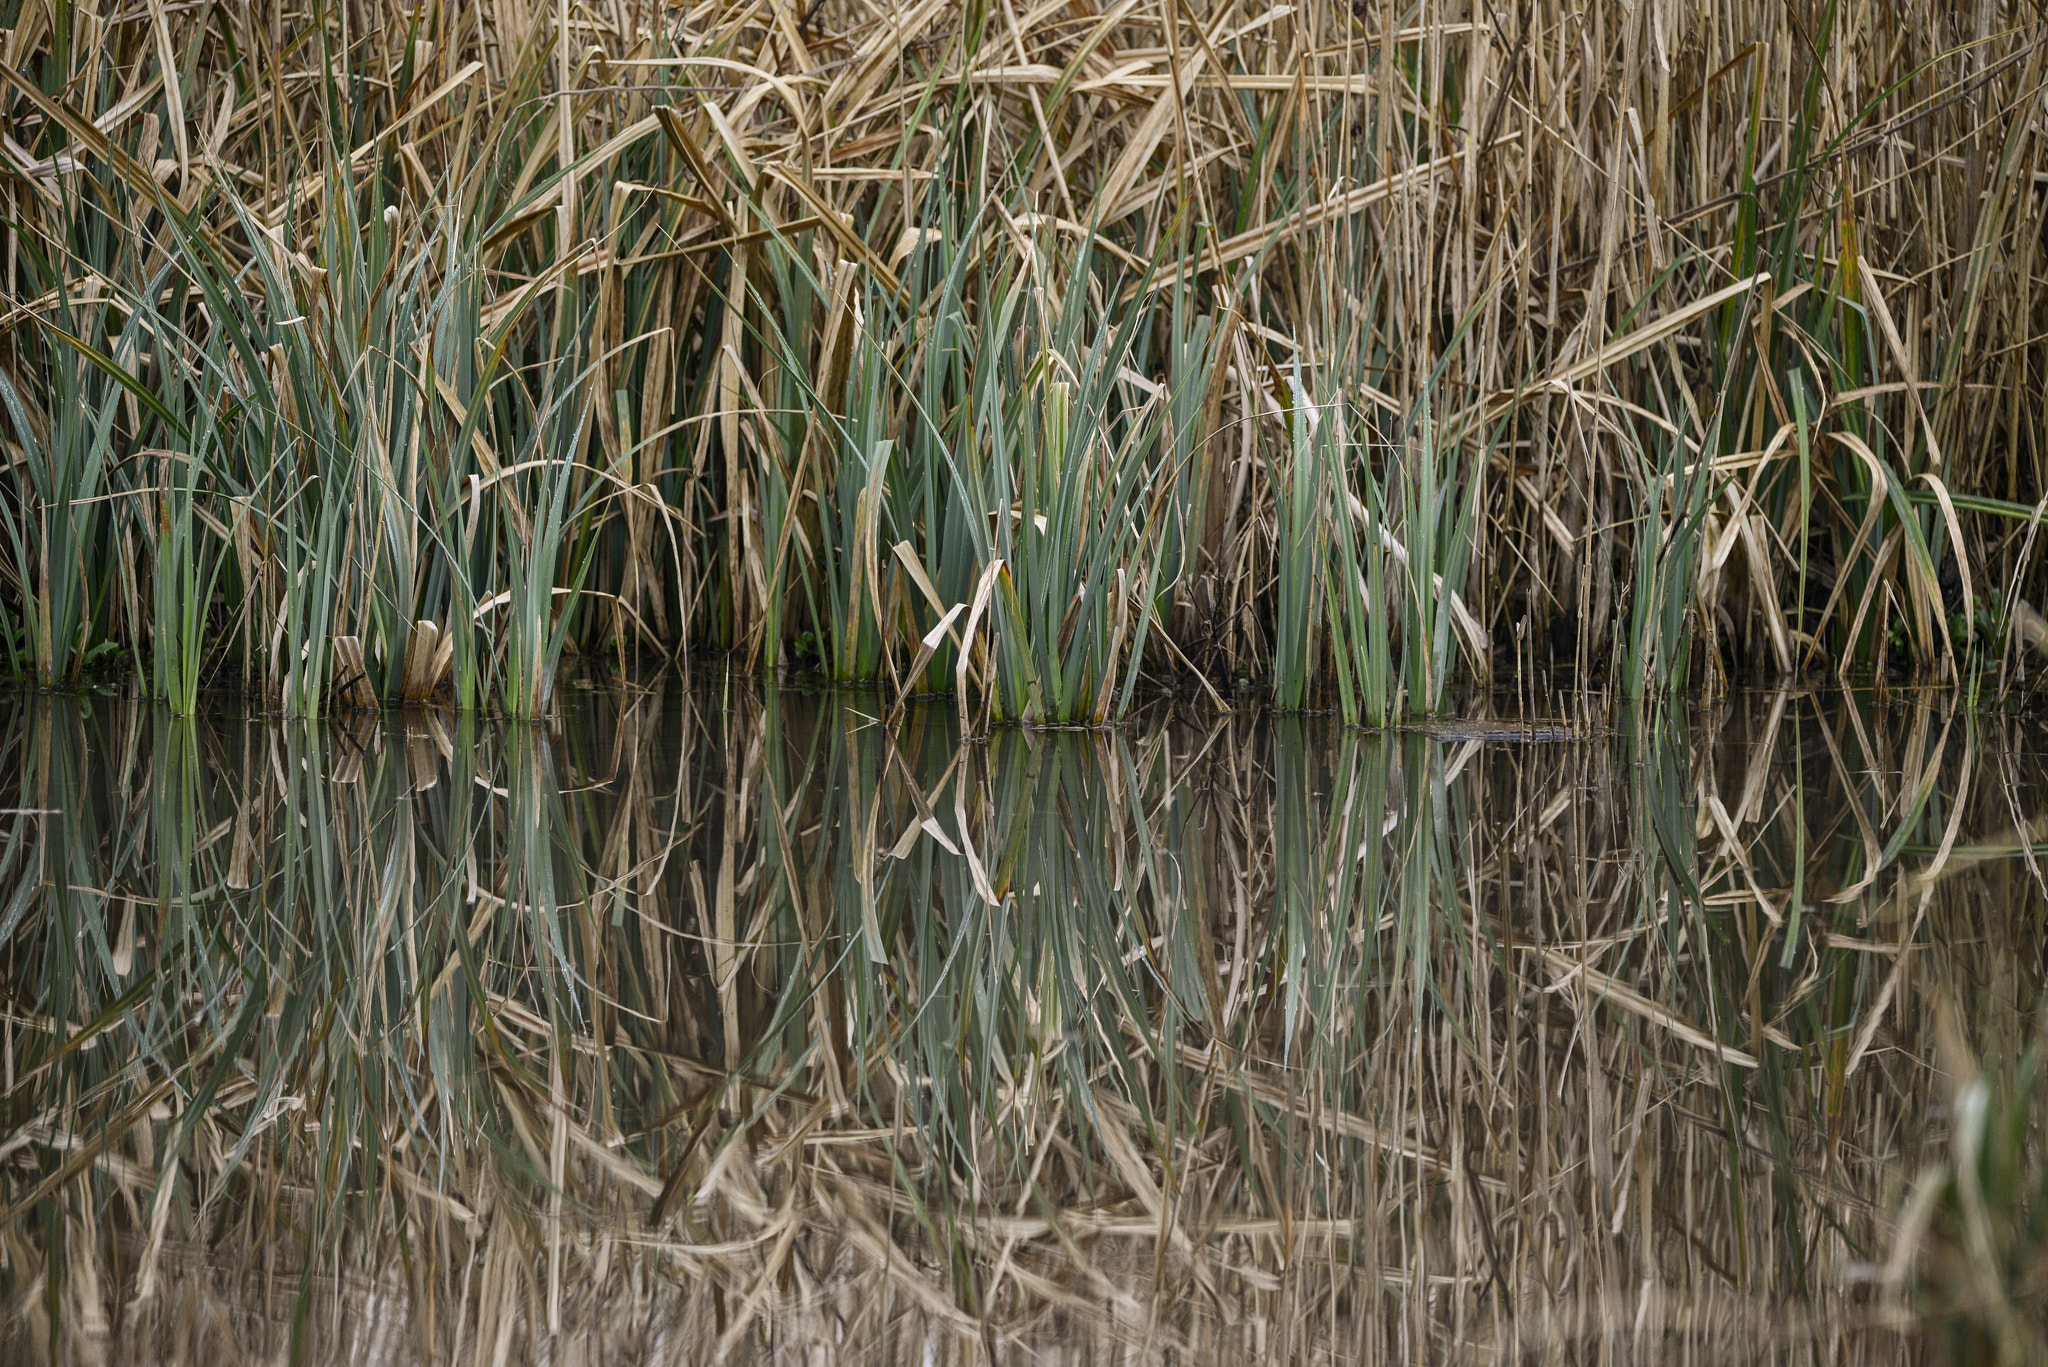 Nikon D800 sample photo. Close up image of reeds in water during spring photography